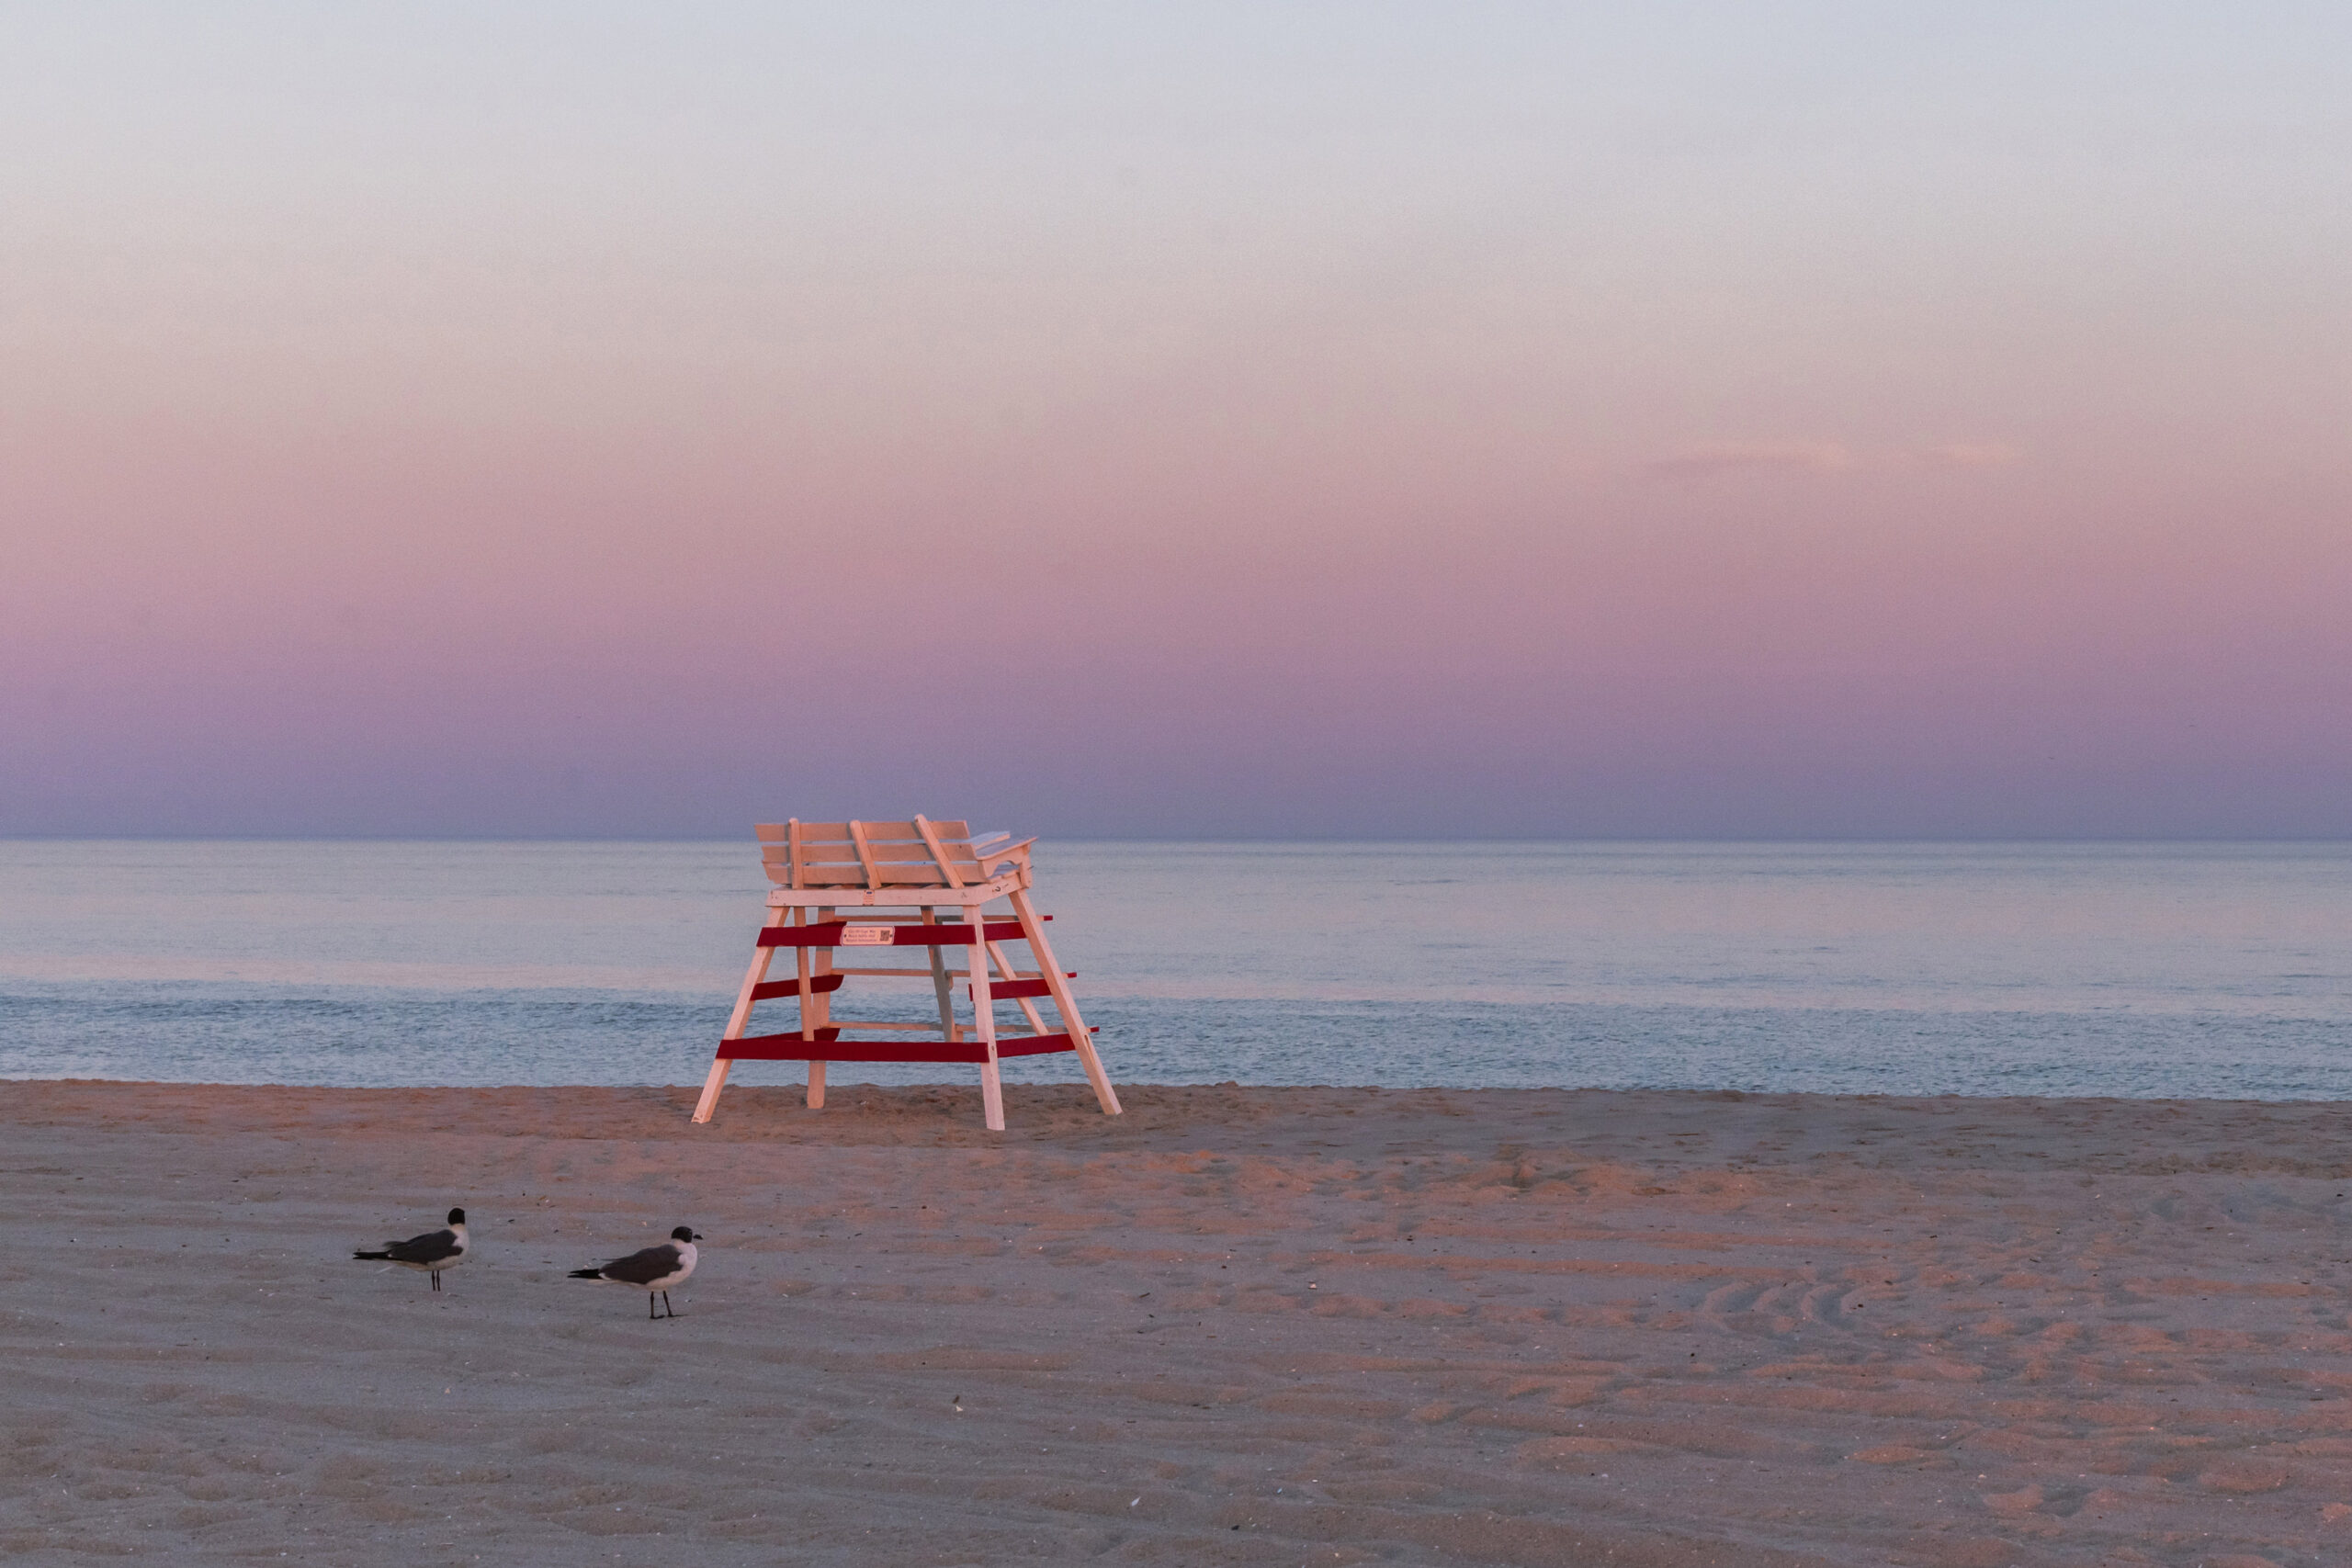 A Cape May lifeguard stand on the beach with two seagulls and a clear pink and blue sky at sunset